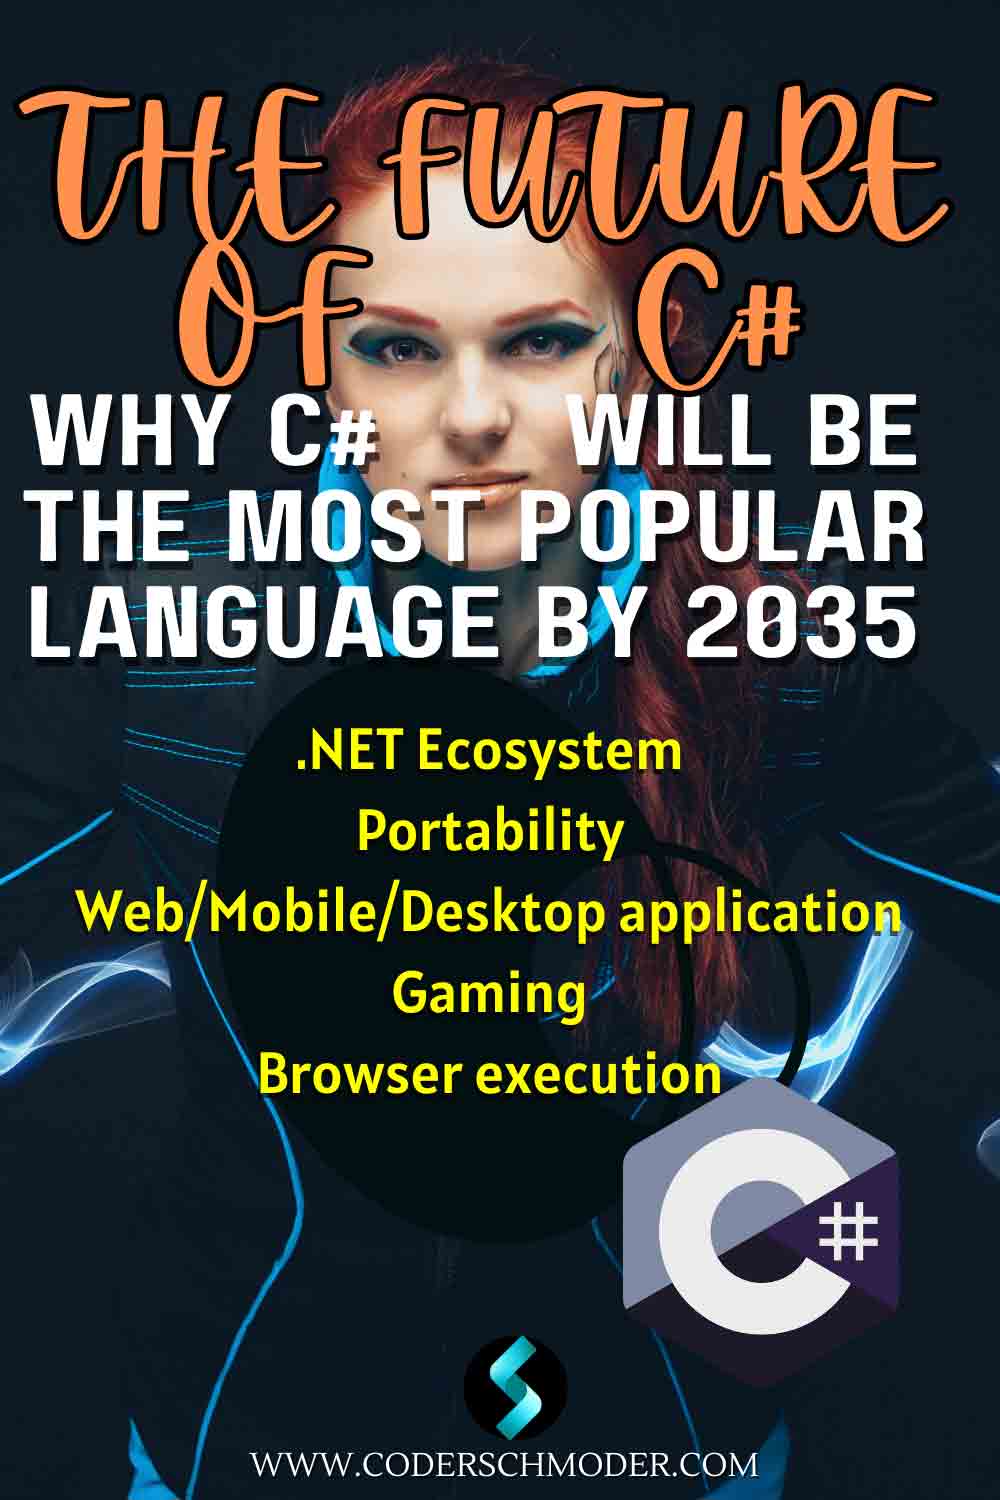 Why C# Will Be the Most Popular Language By 2035